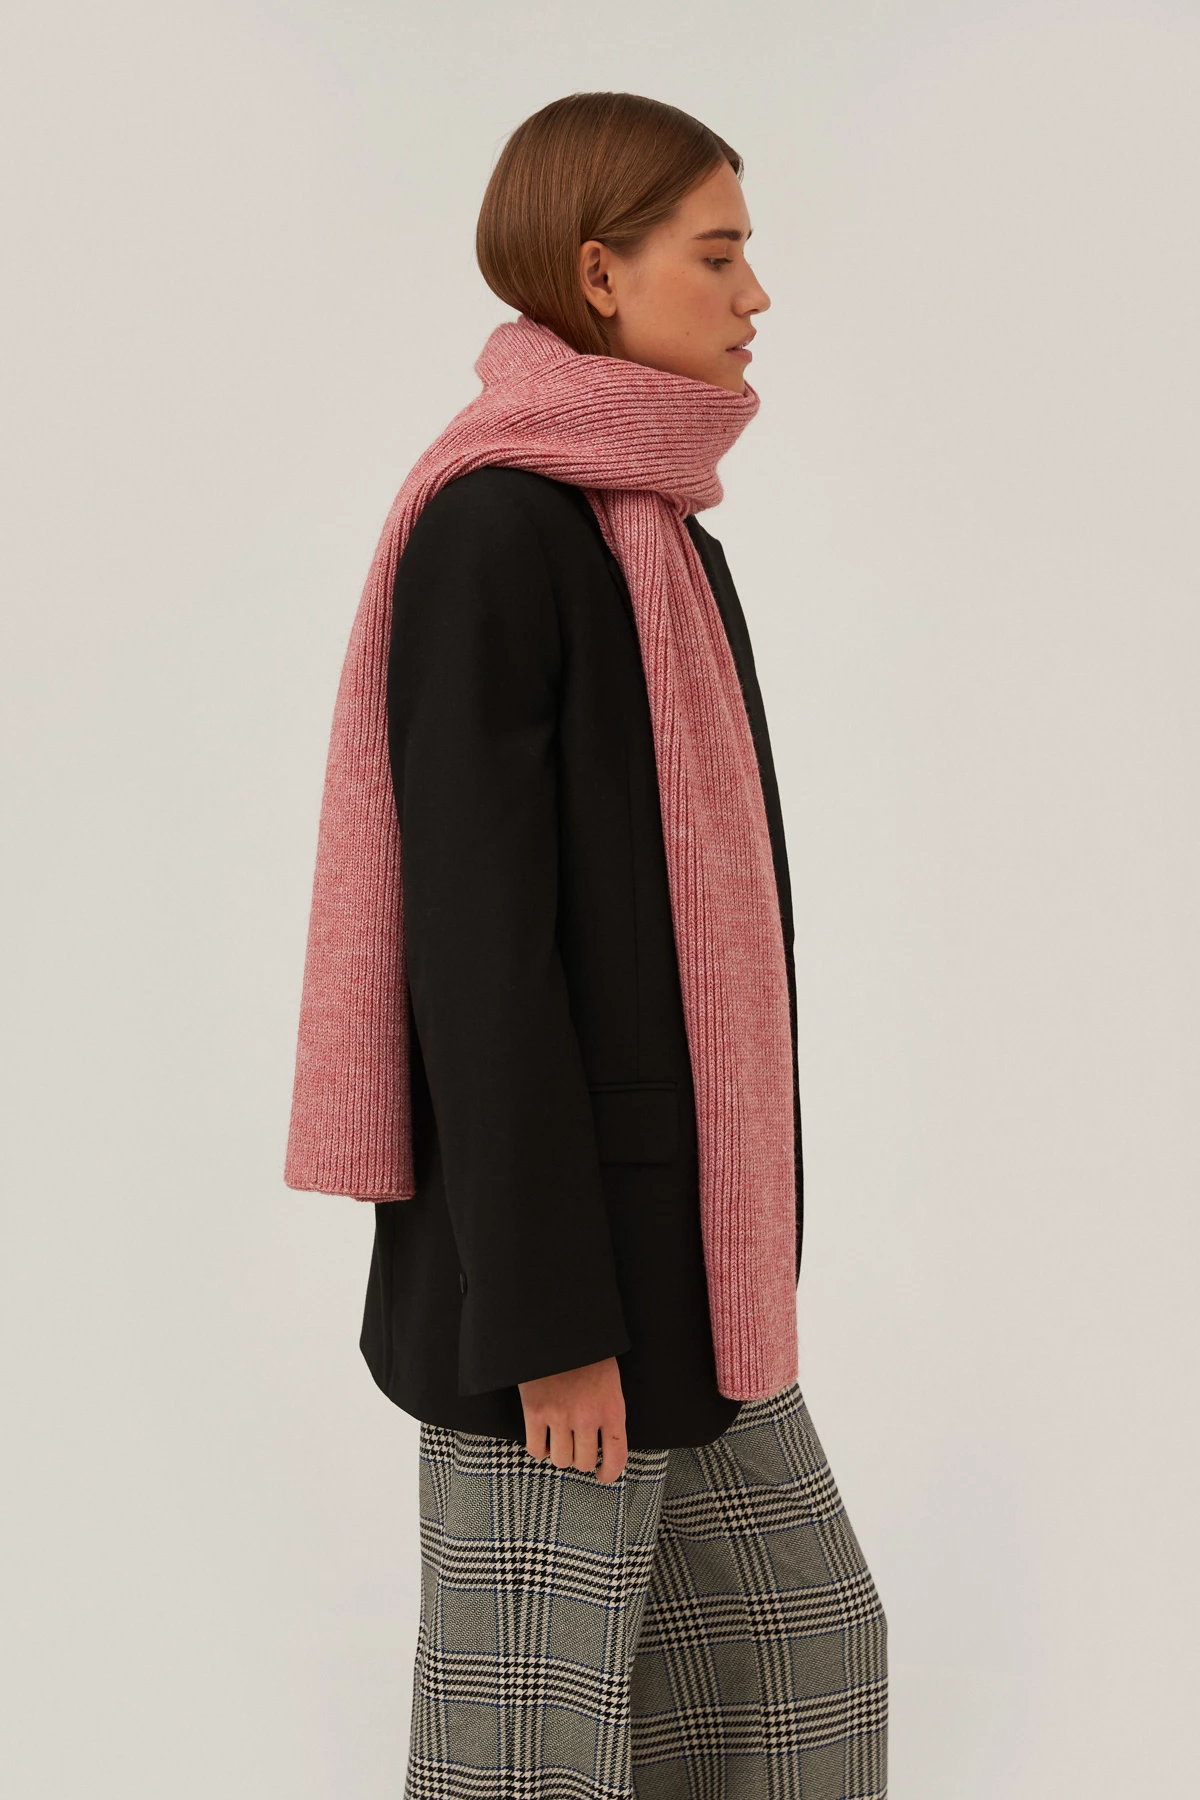 Knitted woolen pink scarf, photo 1